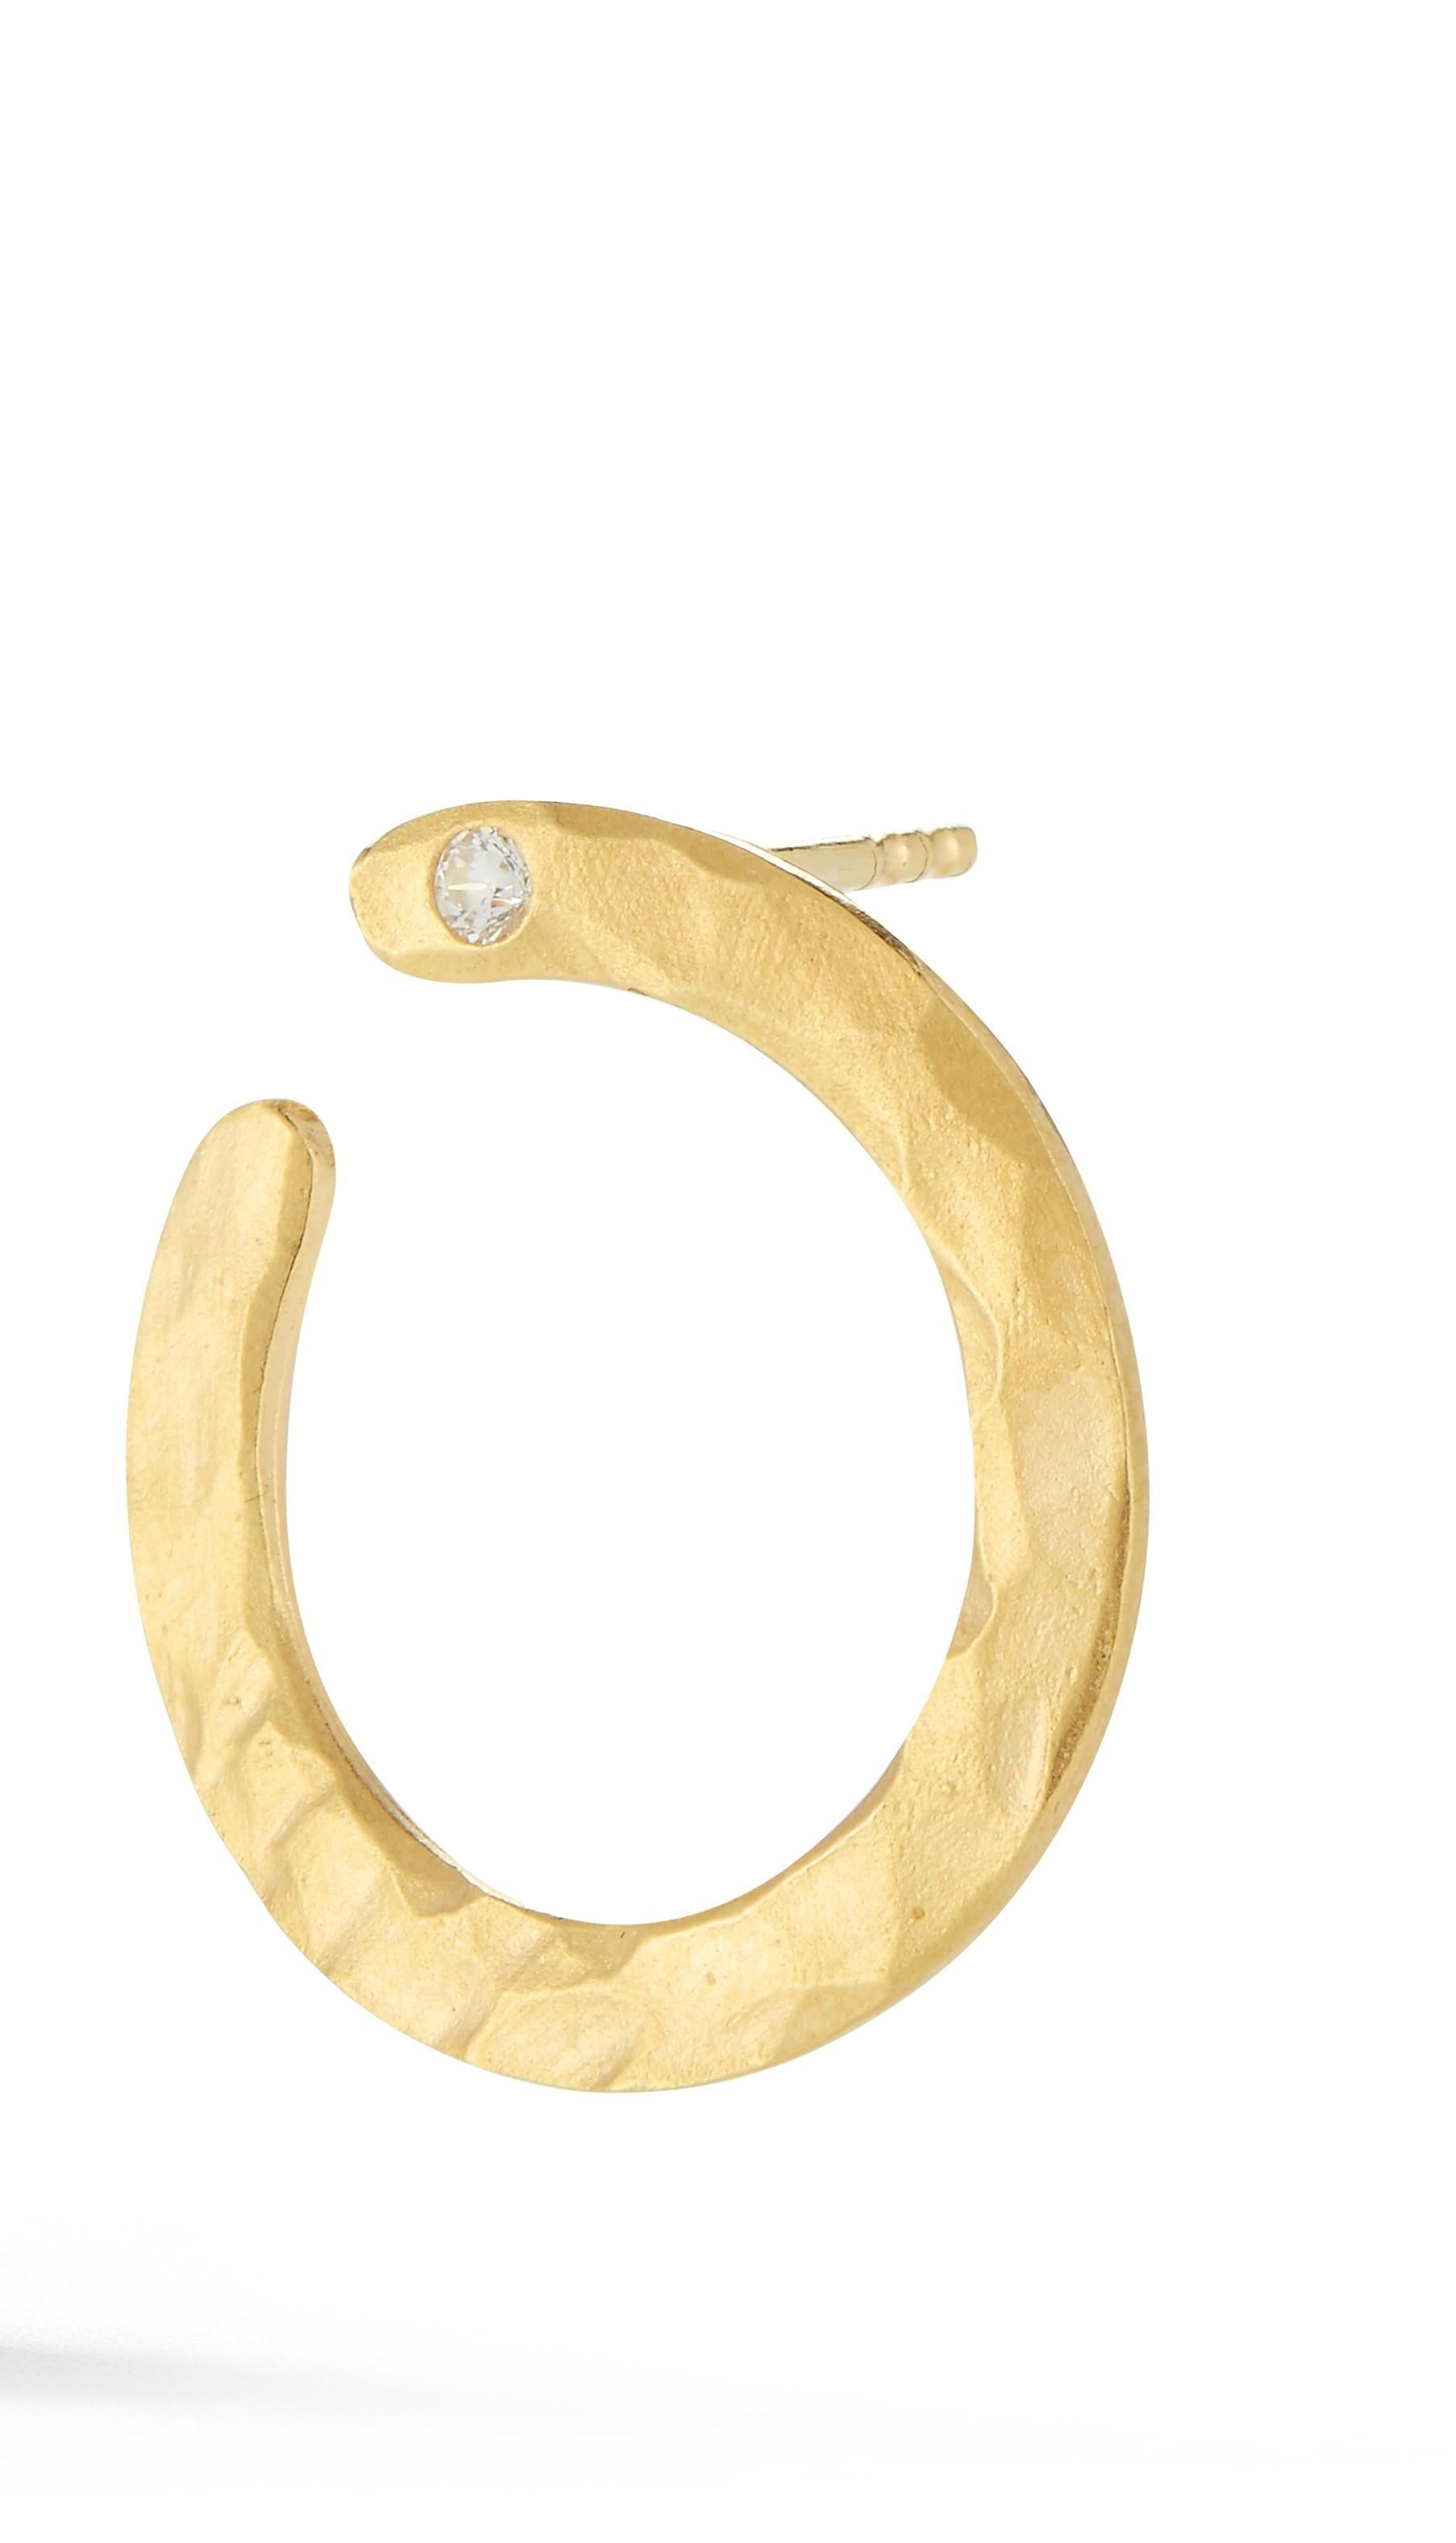 14 Karat Yellow Gold Hand-Crafted Matte and Hammer-Finished Half-Circle Earrings, Accented with 0.04 Carats of Burnish-Set Diamonds and a Post-with-Friction Closure.
